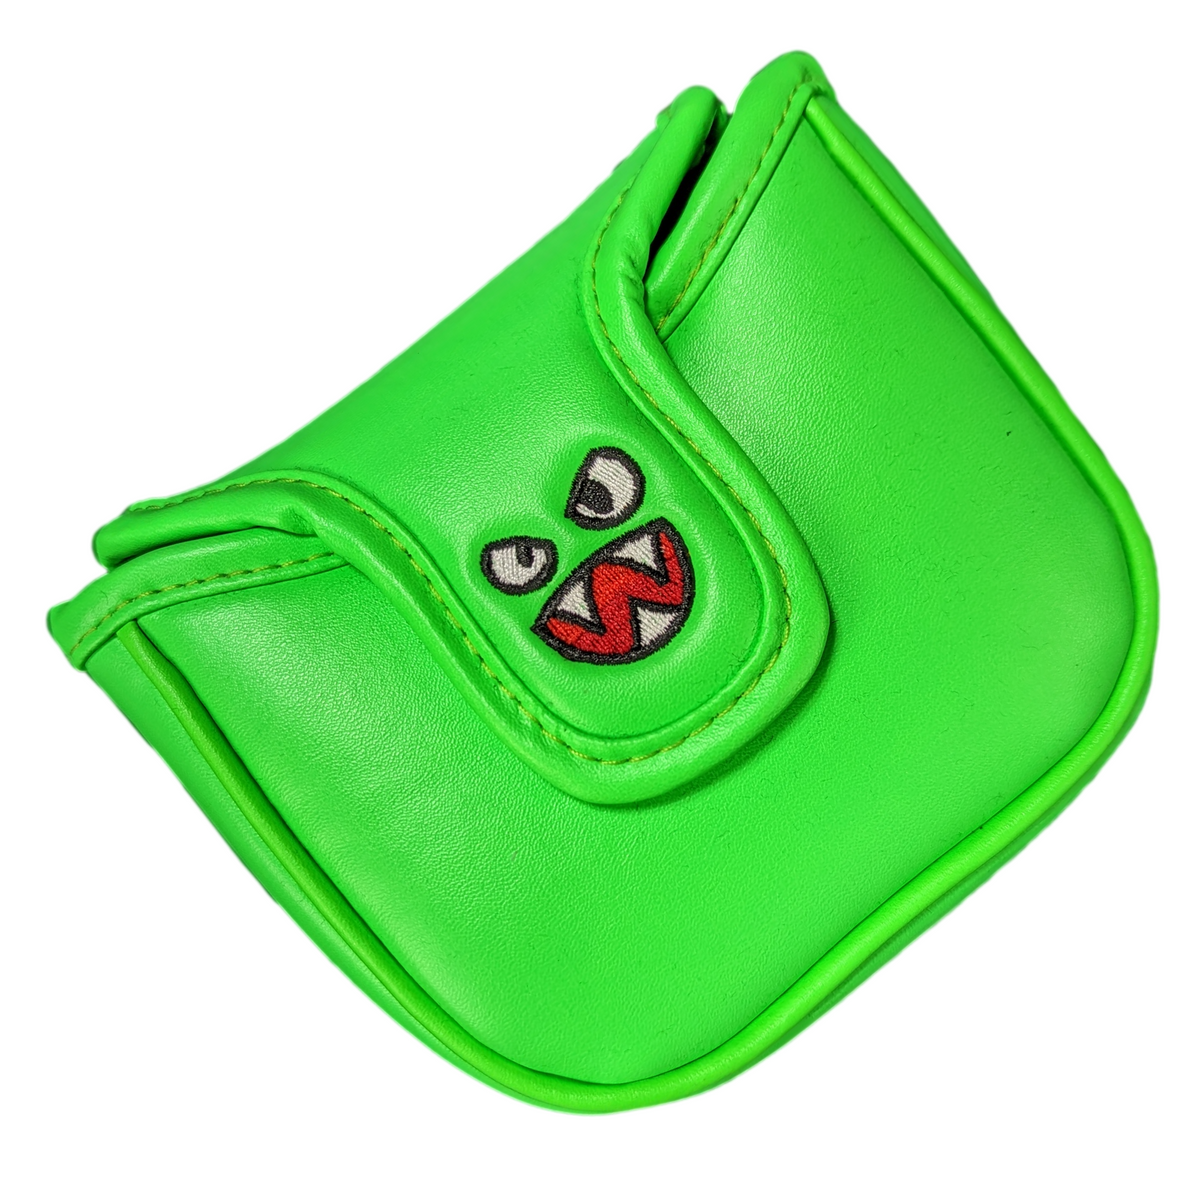 Green Monster - Square MALLET Putter Headcover